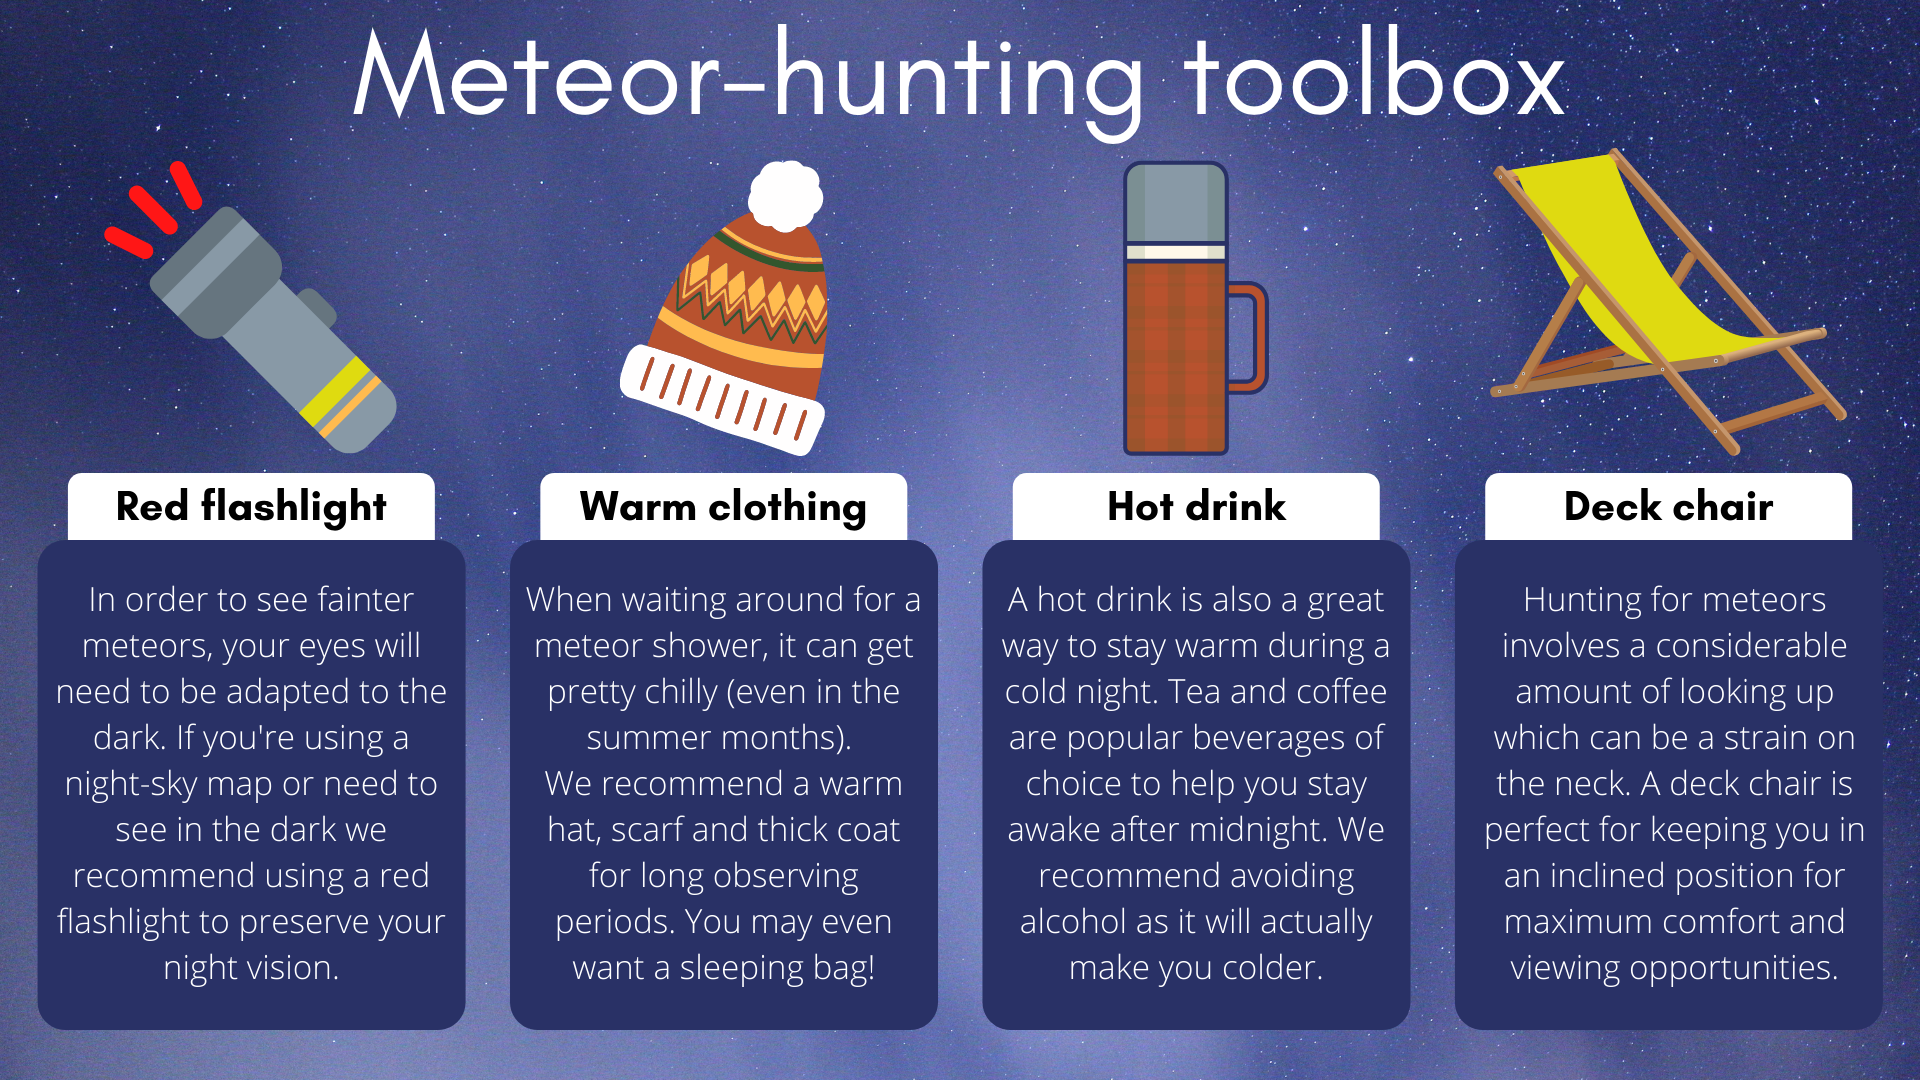 For an ideal meteor hunting experience you will need a ref flashlight, warm clothing, a hot drink and a nice deck chair.